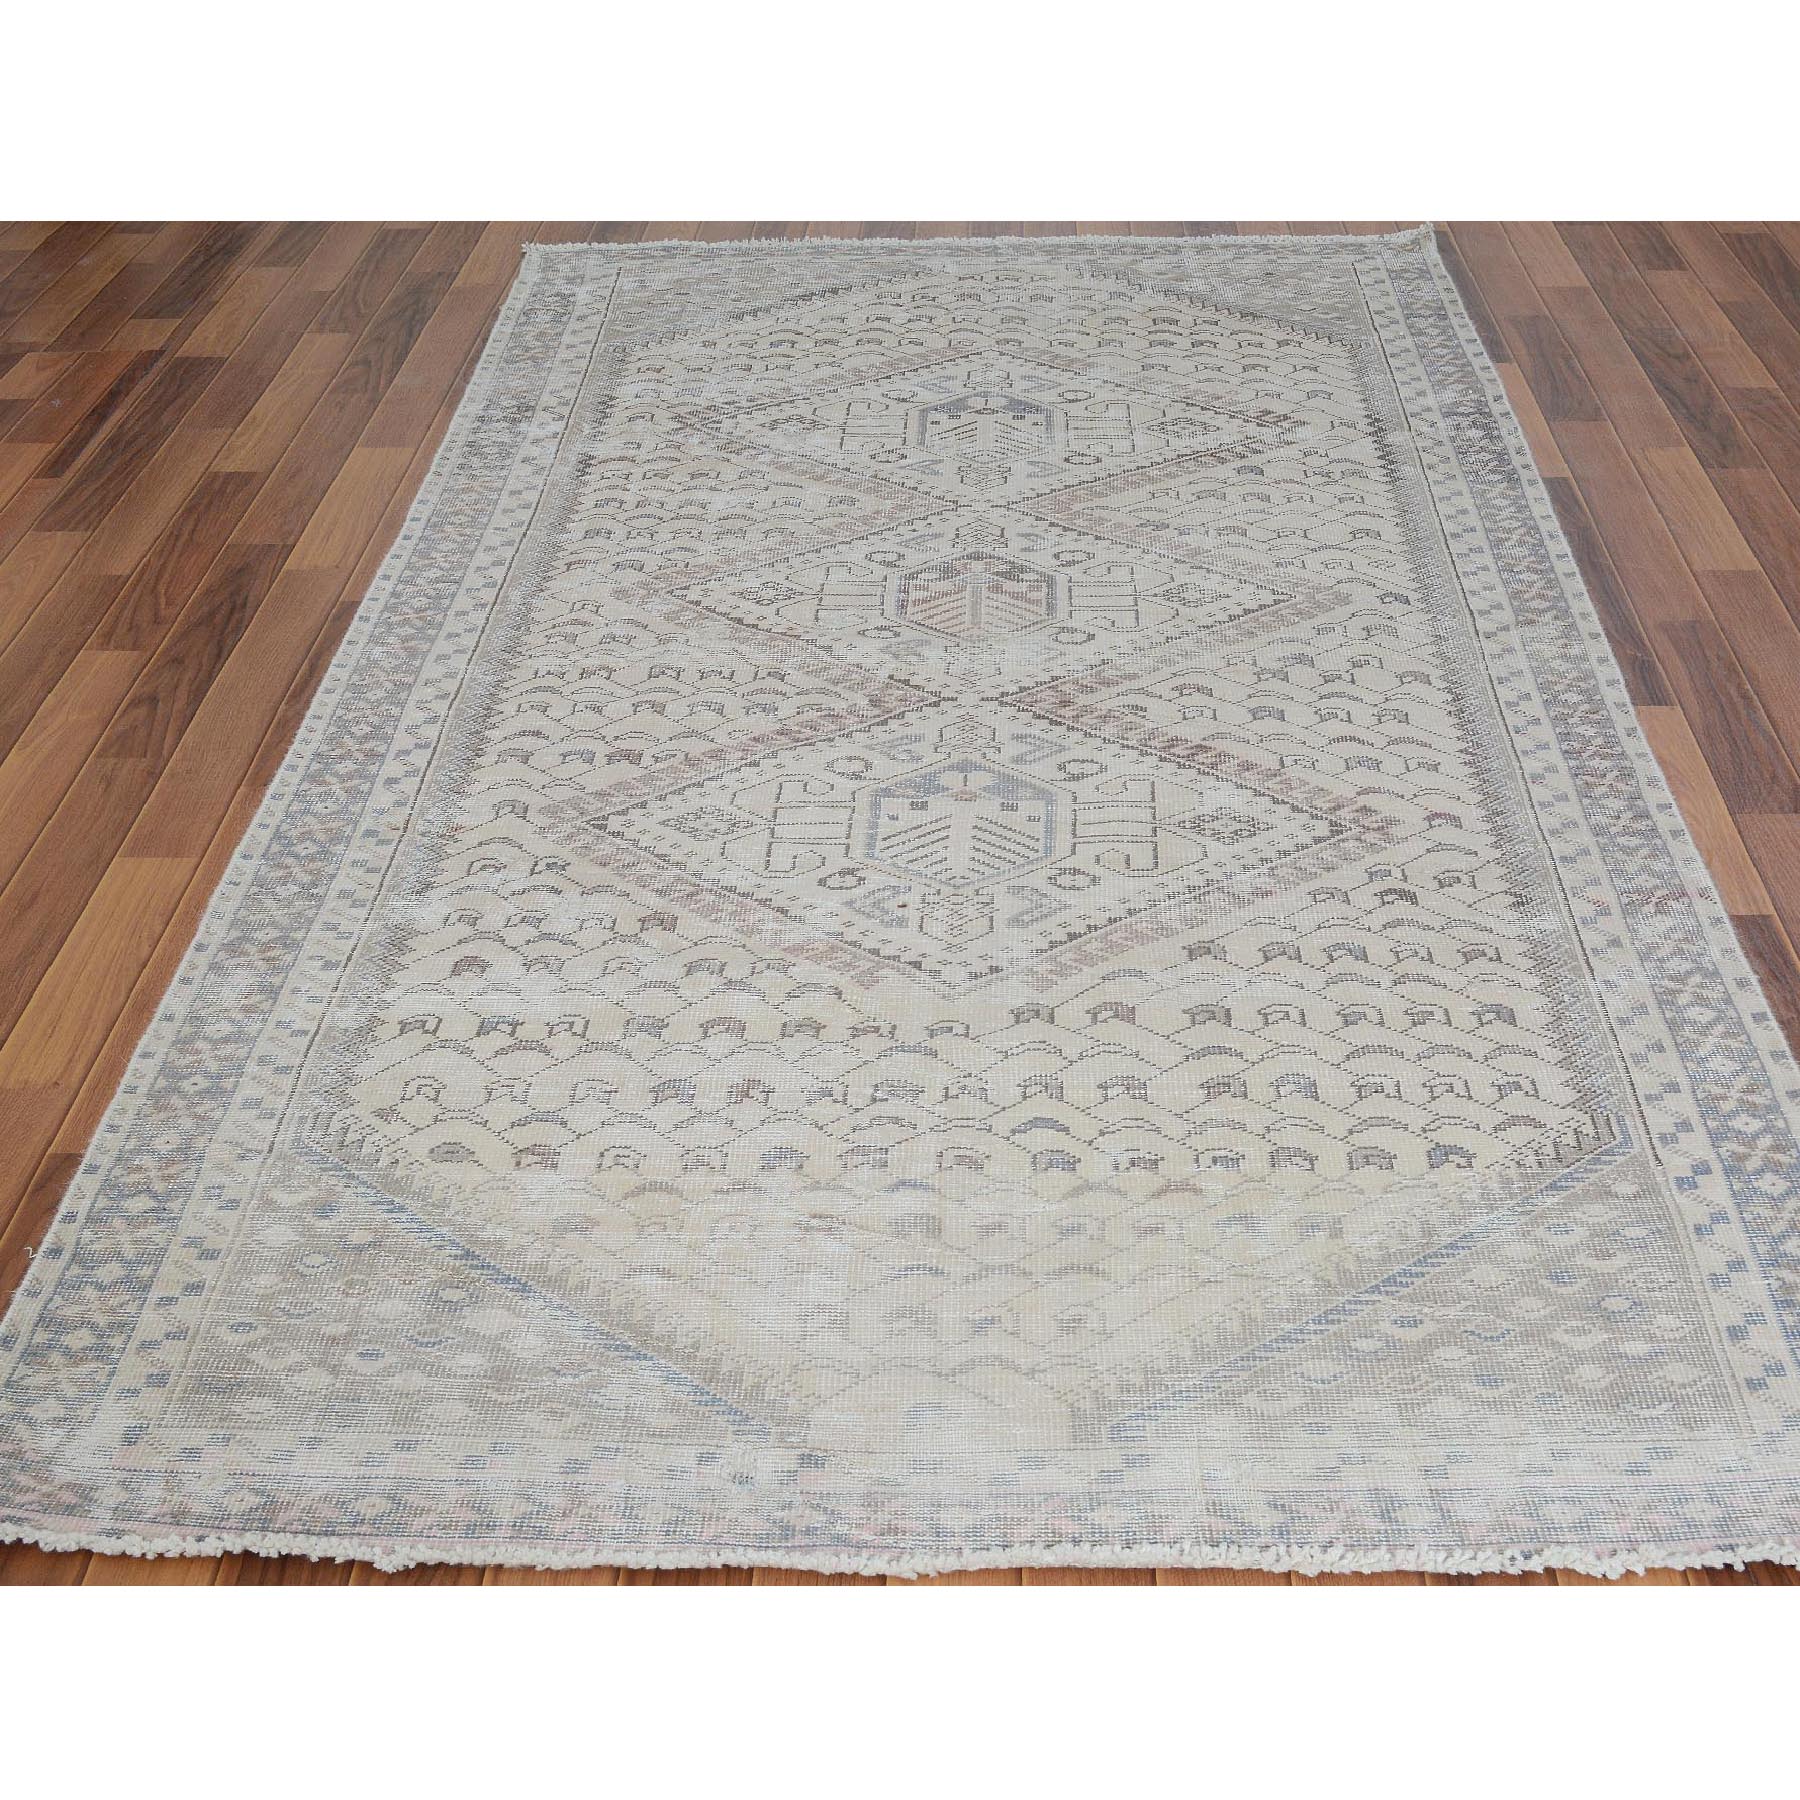 5-x9-7  Natural Color Vintage And Worn Down Shiraz Runner Pure Wool Hand Knotted Oriental Rug 